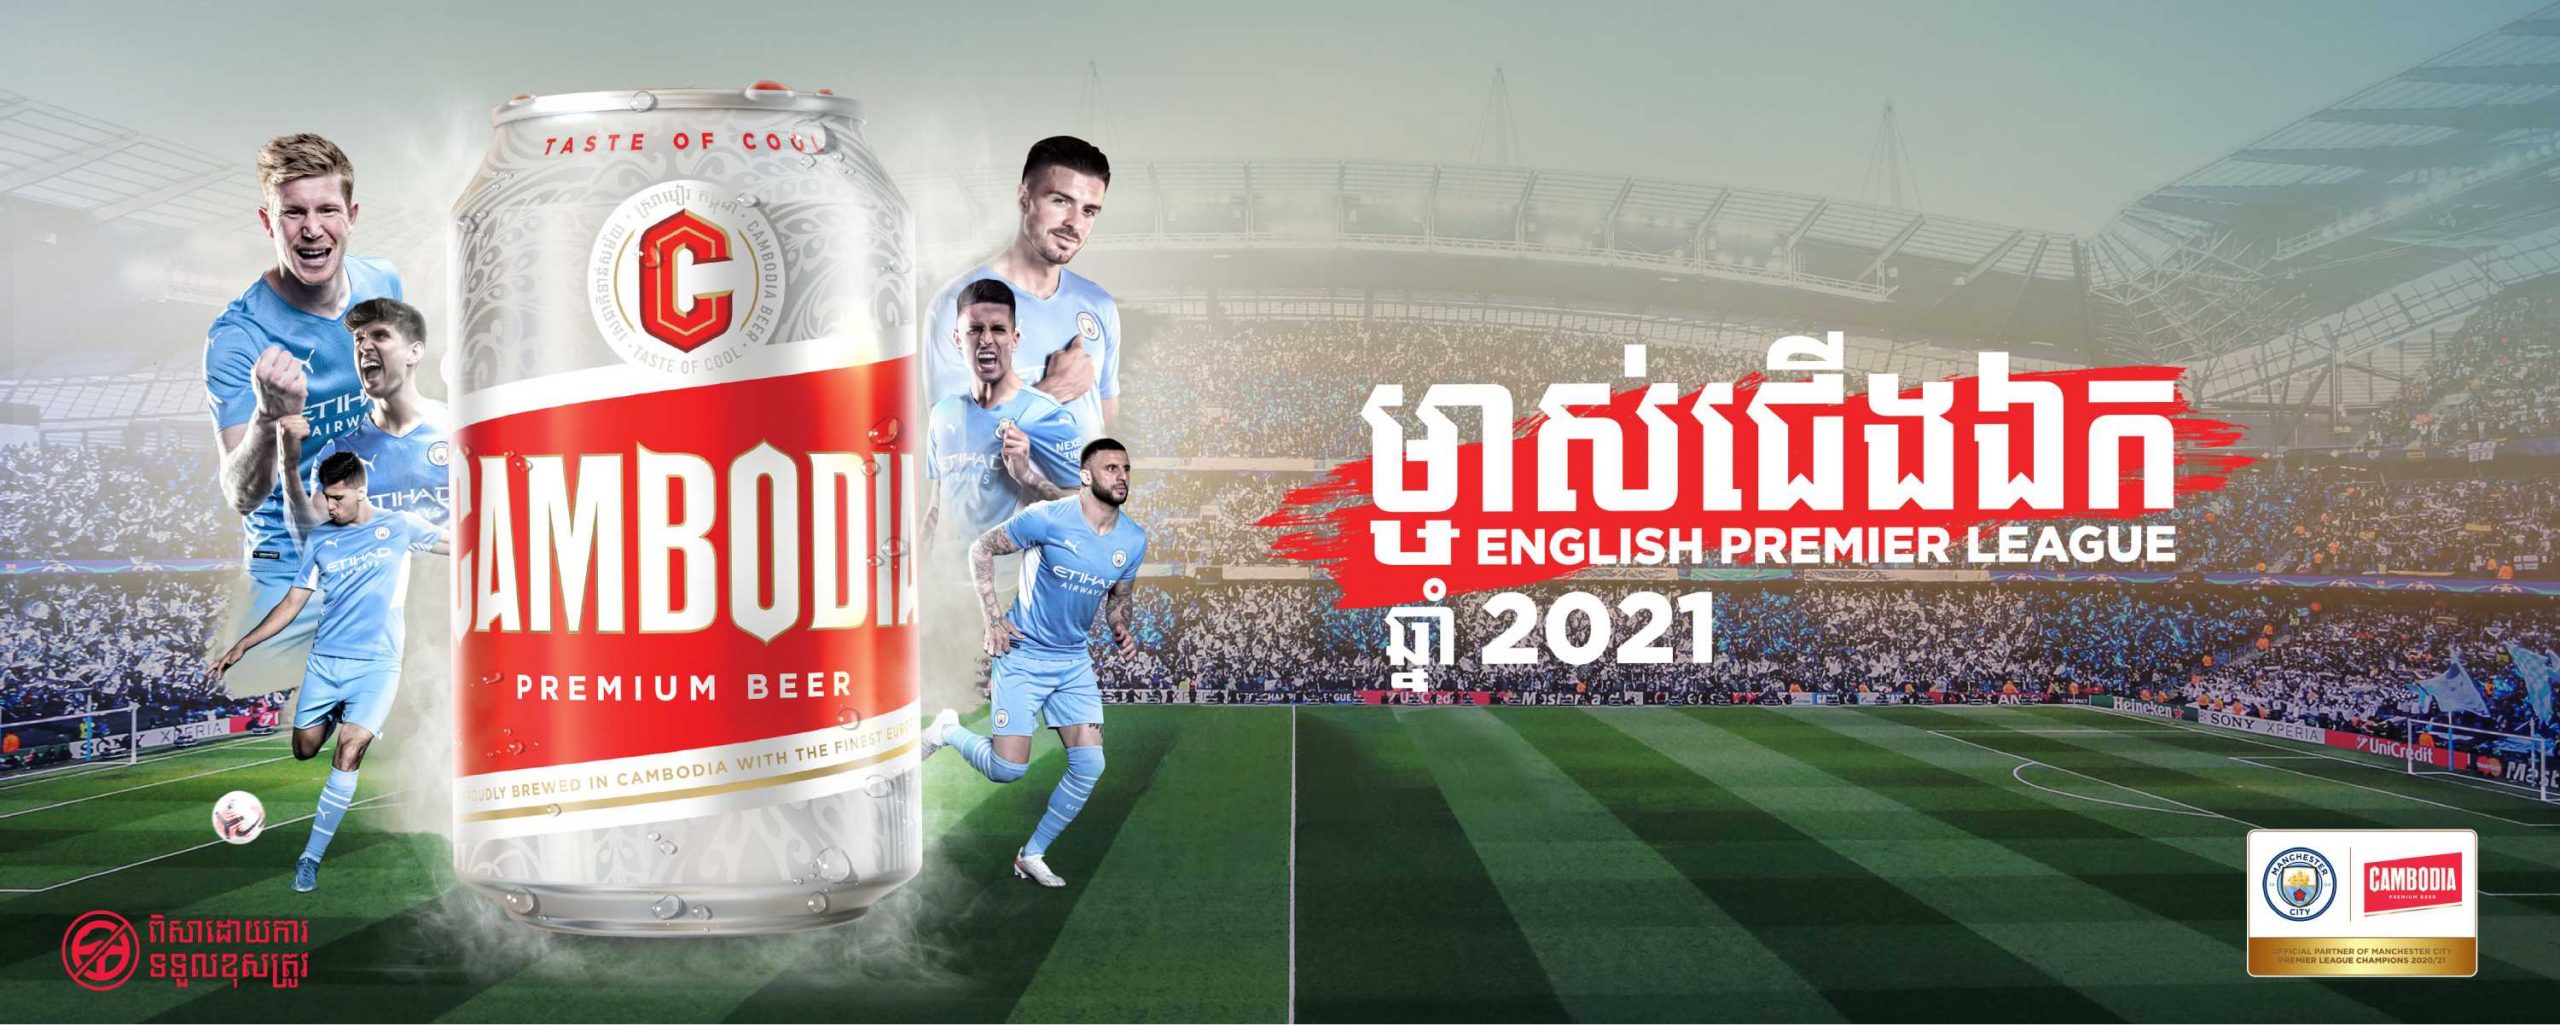 Cambodia Beer Manchester City - 2021